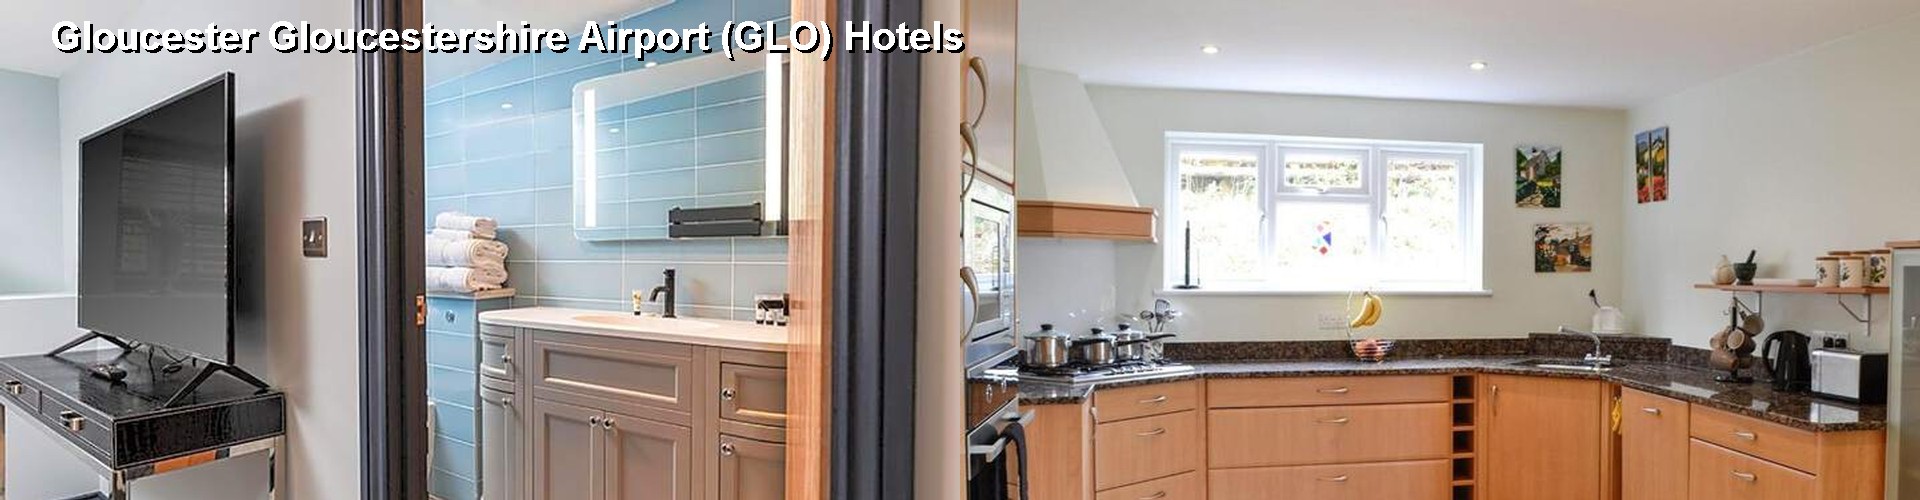 5 Best Hotels near Gloucester Gloucestershire Airport (GLO)